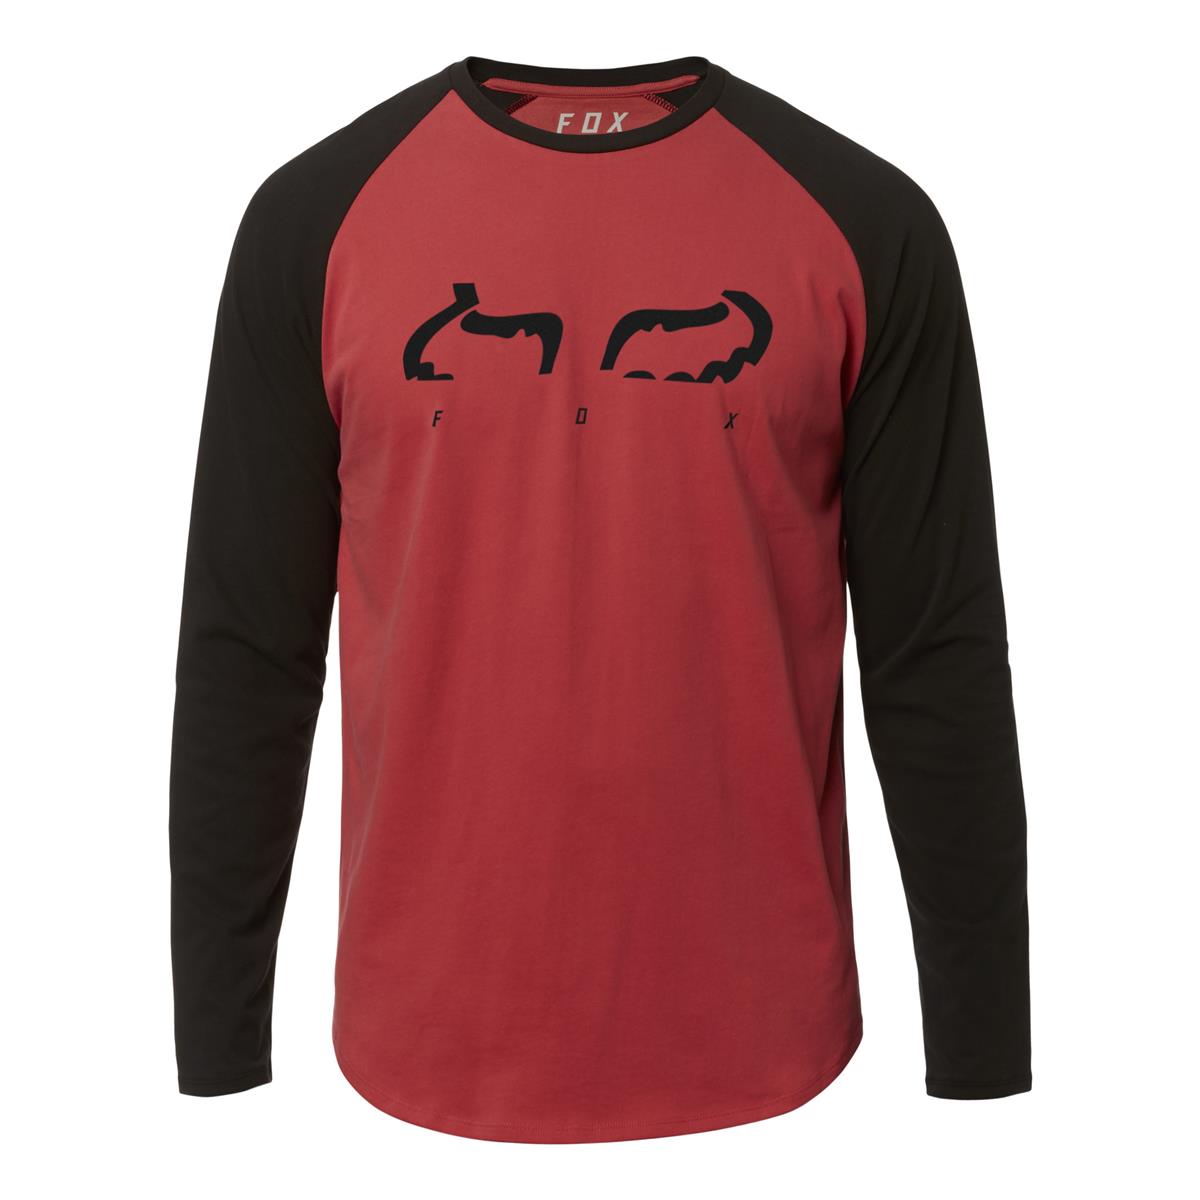 Fox T-Shirt Manches Longues Strap Airline Rio Red